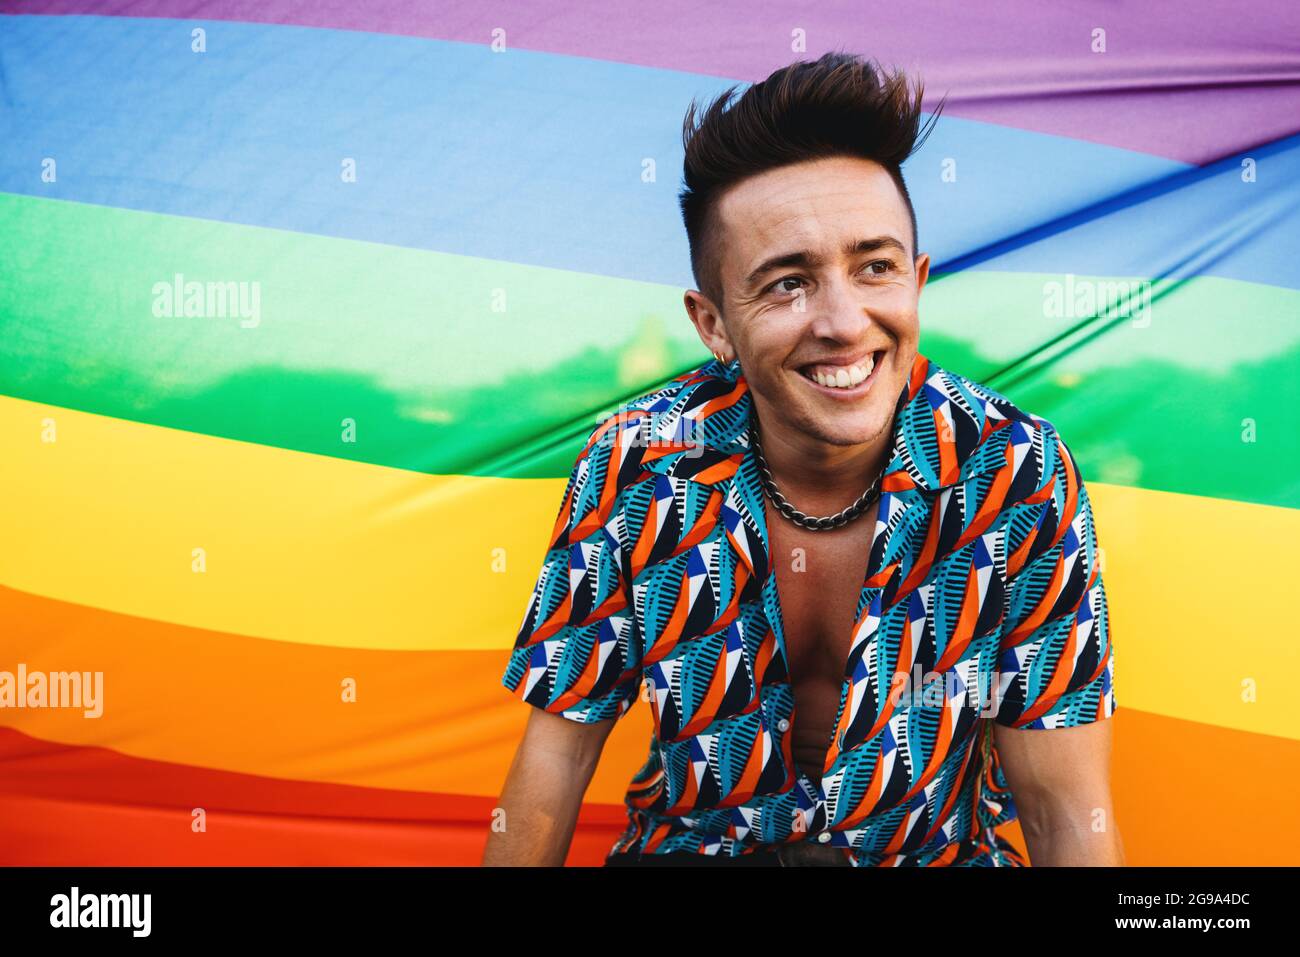 Happy transgender man embracing his queer identity. Young transman smiling cheerfully while standing against a pride flag. Young queer man posing agai Stock Photo